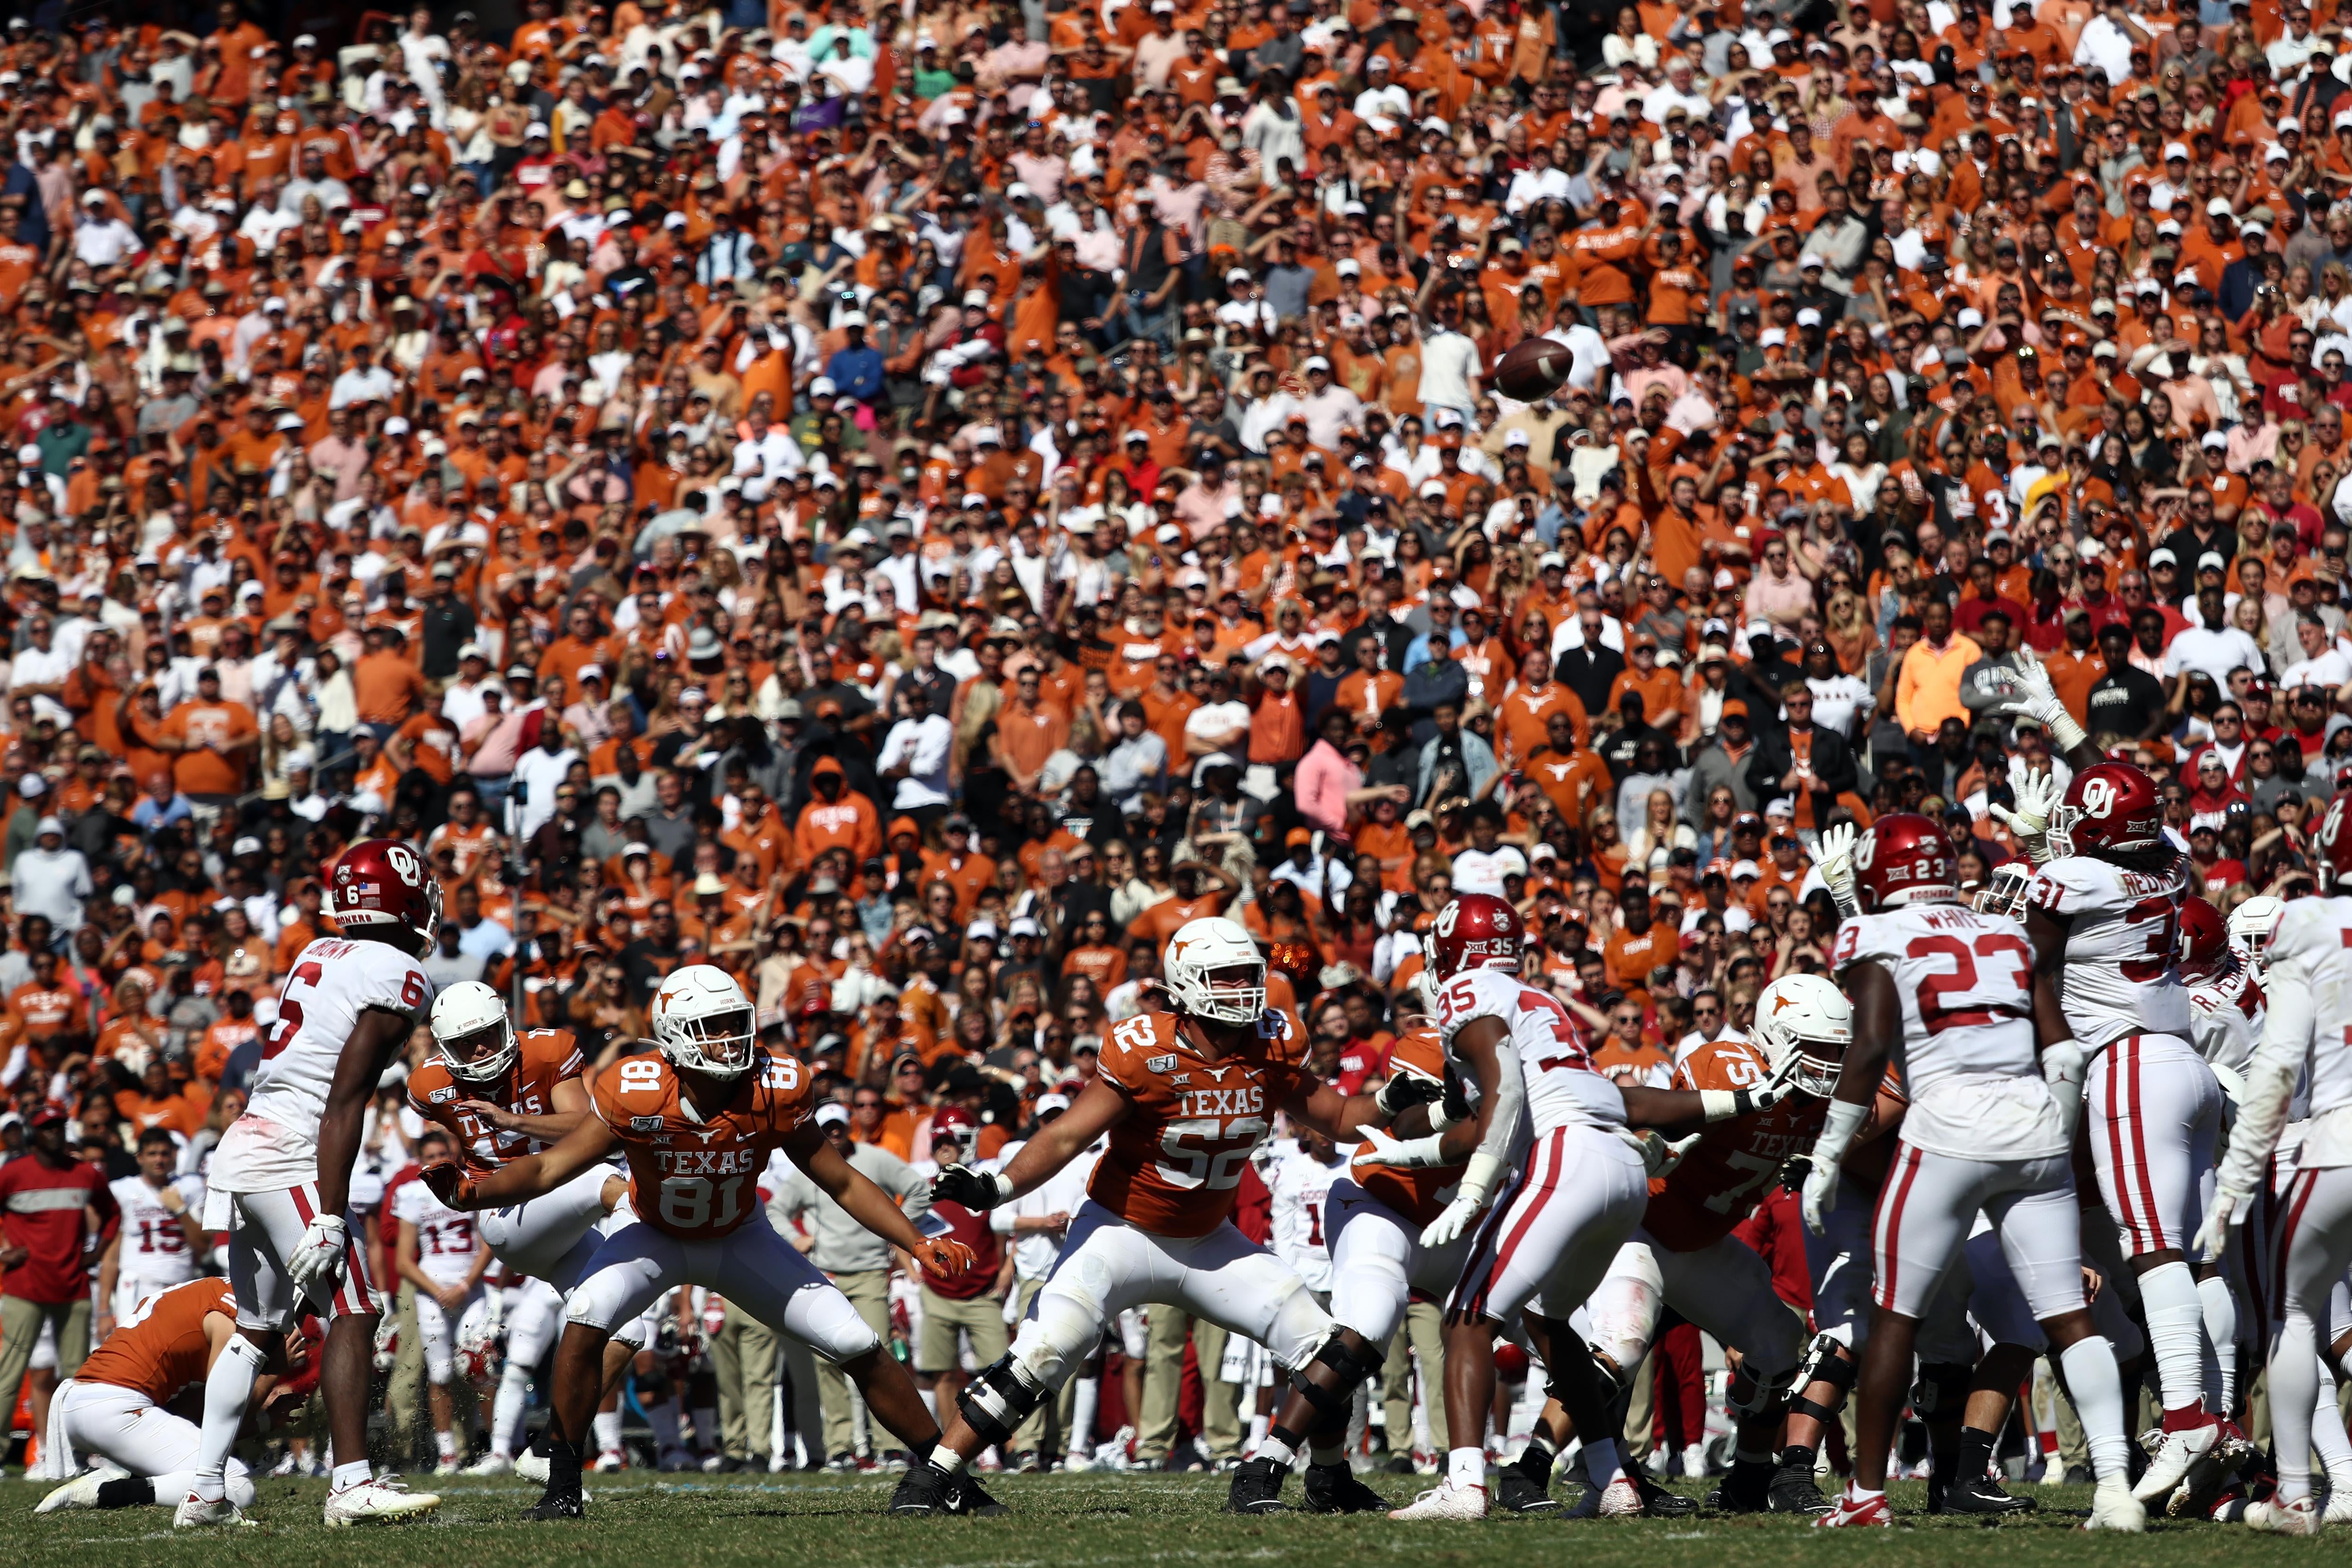 A scrum of Texas and Oklahoma players on the football field with the crowd in Texas orange and Oklahoma red looking on in the background